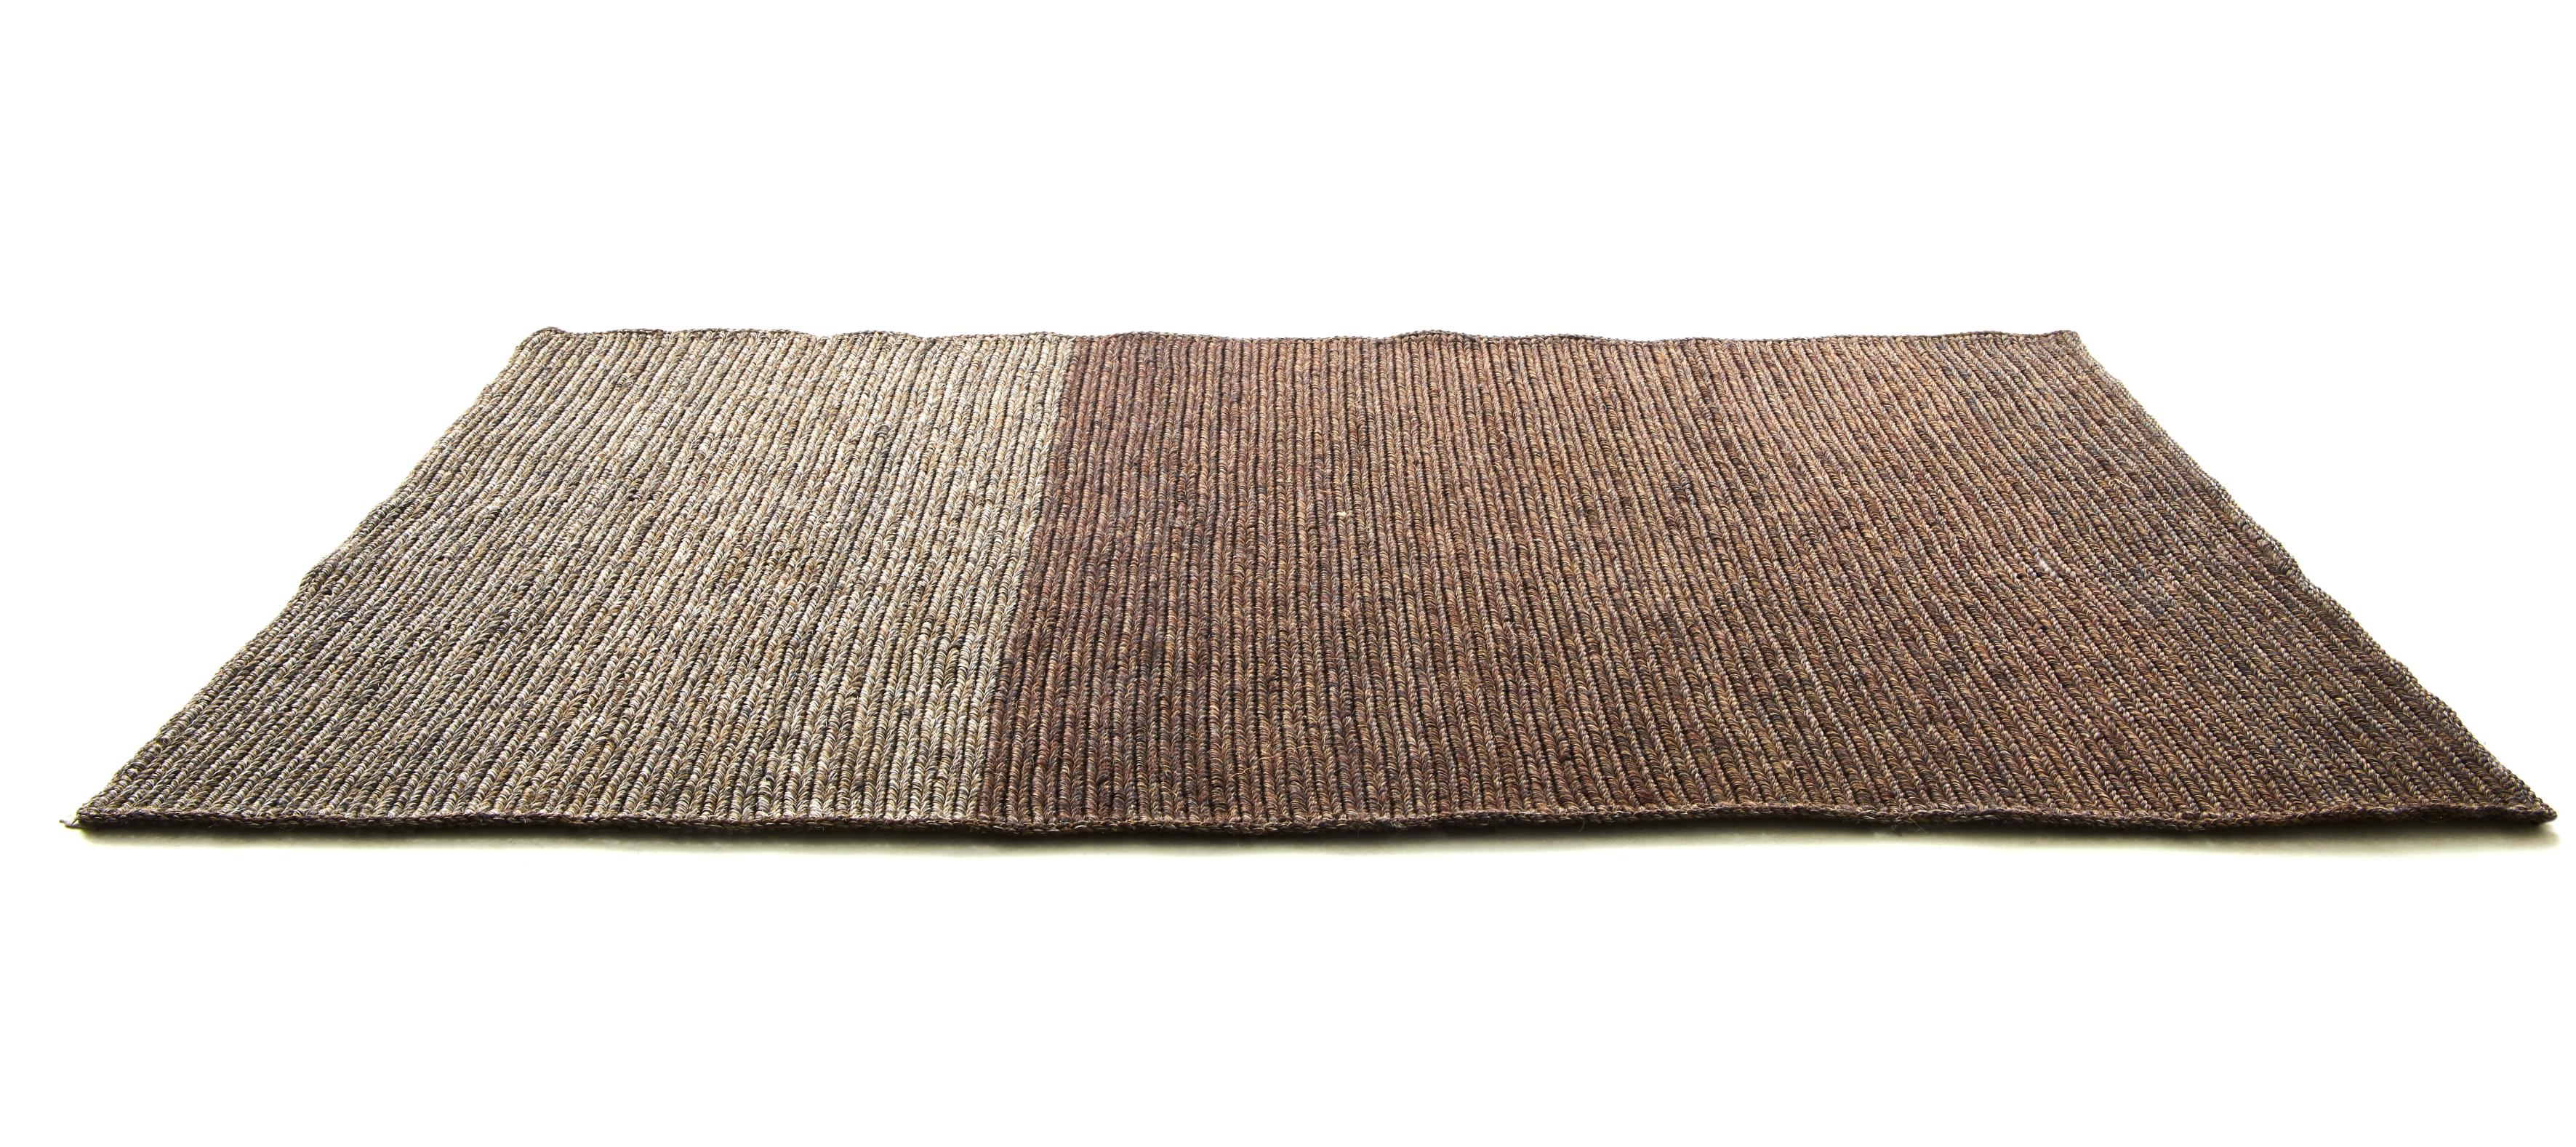 Large par rug by Sebastian Herkner
Materials: Fibres from Jipi palm leaves fibers. 
Technique: Naturally dyed fibers. Hand-woven in Colombia.
Dimensions: W 160 x L 224 cm 
Available in colors: cacao melange/ brown melange, light grey melange/